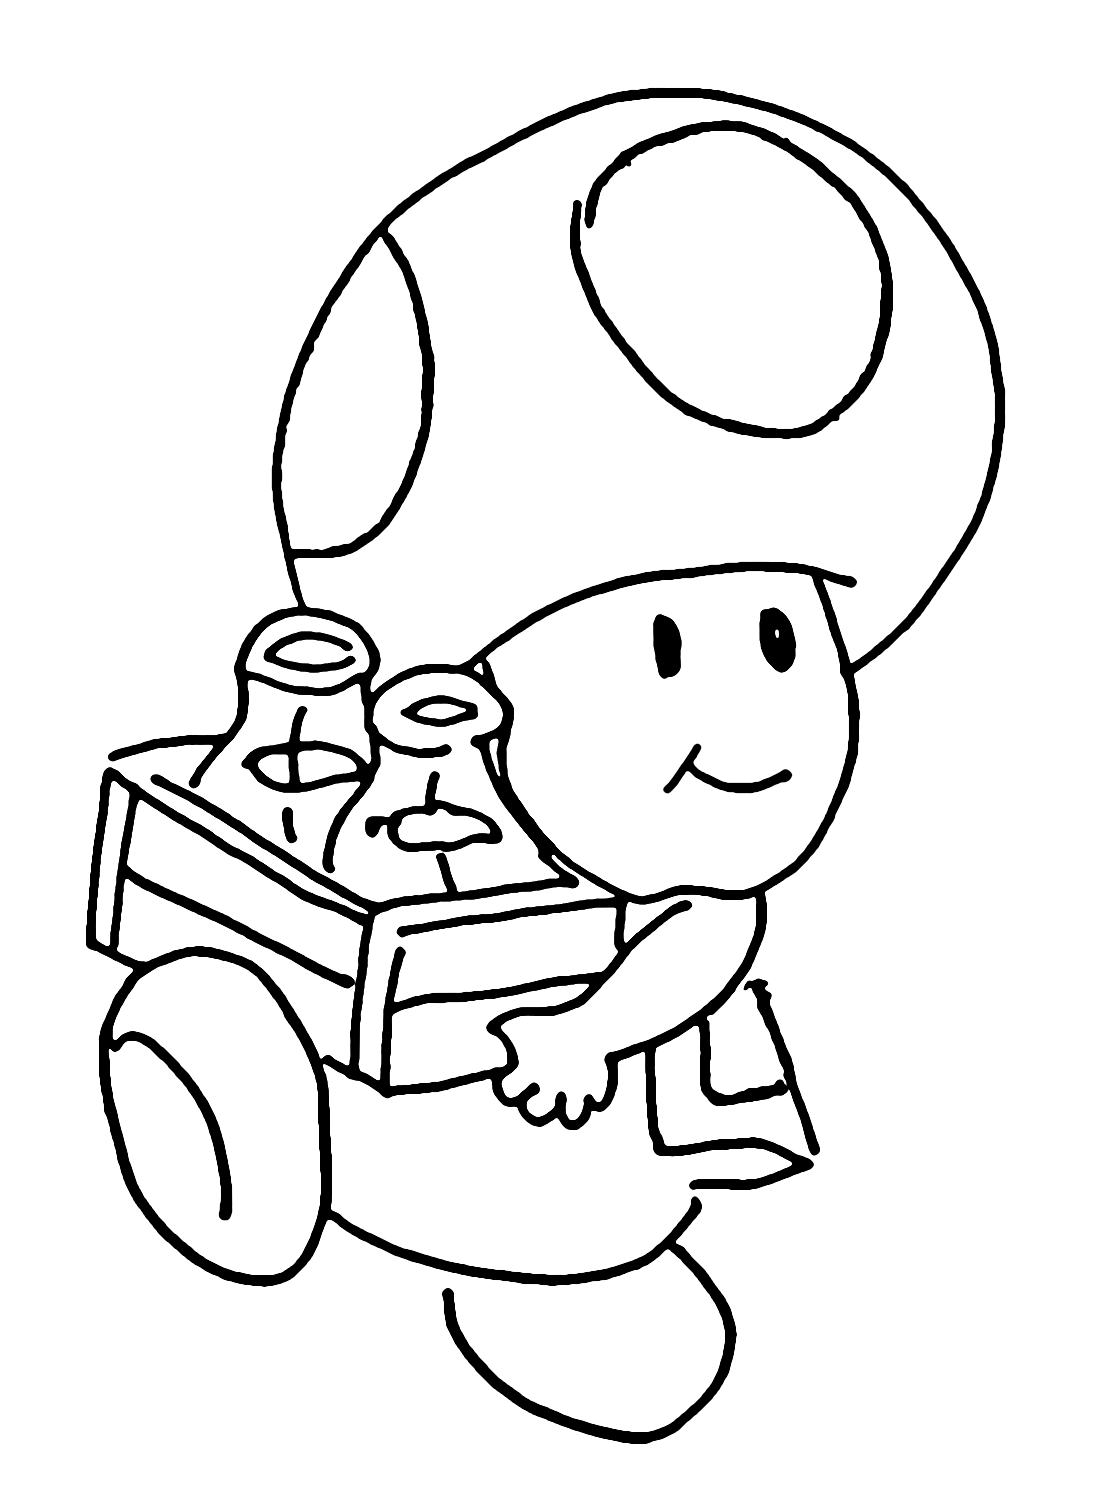 Toad from Super Mario Coloring Pages